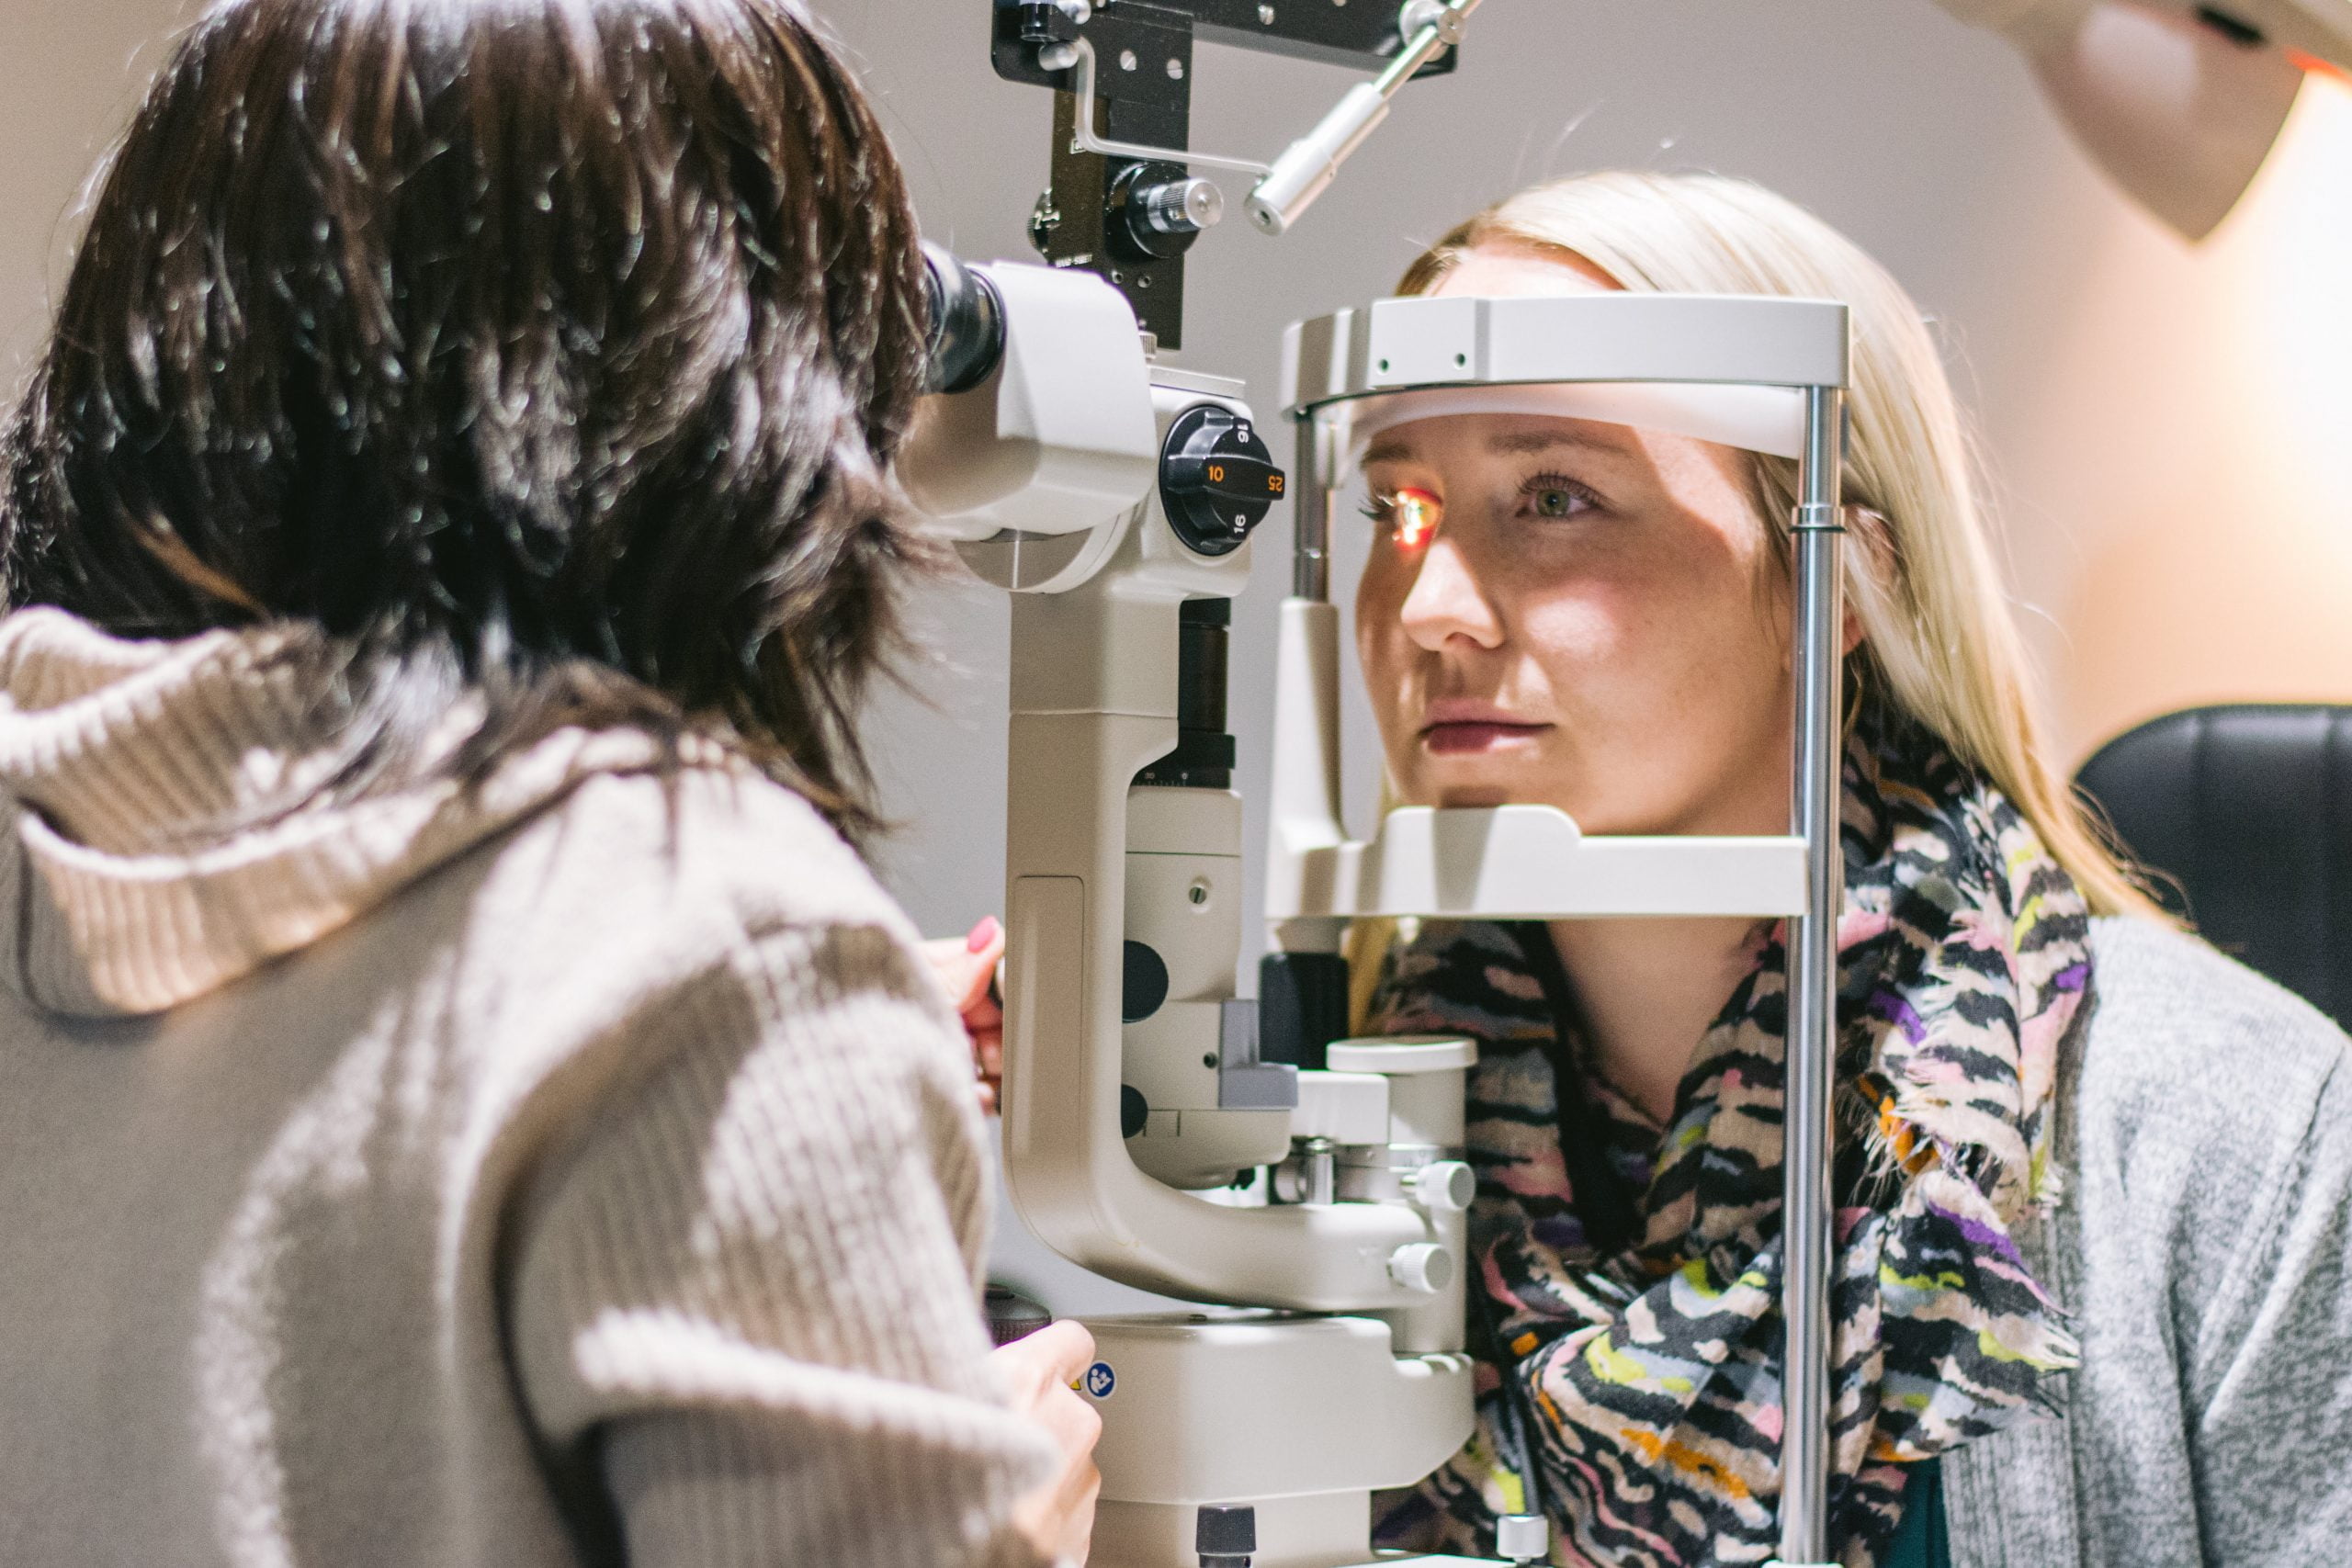 Know Your Risk for Diabetes | Eye Exams Can Detect Diabetes Early